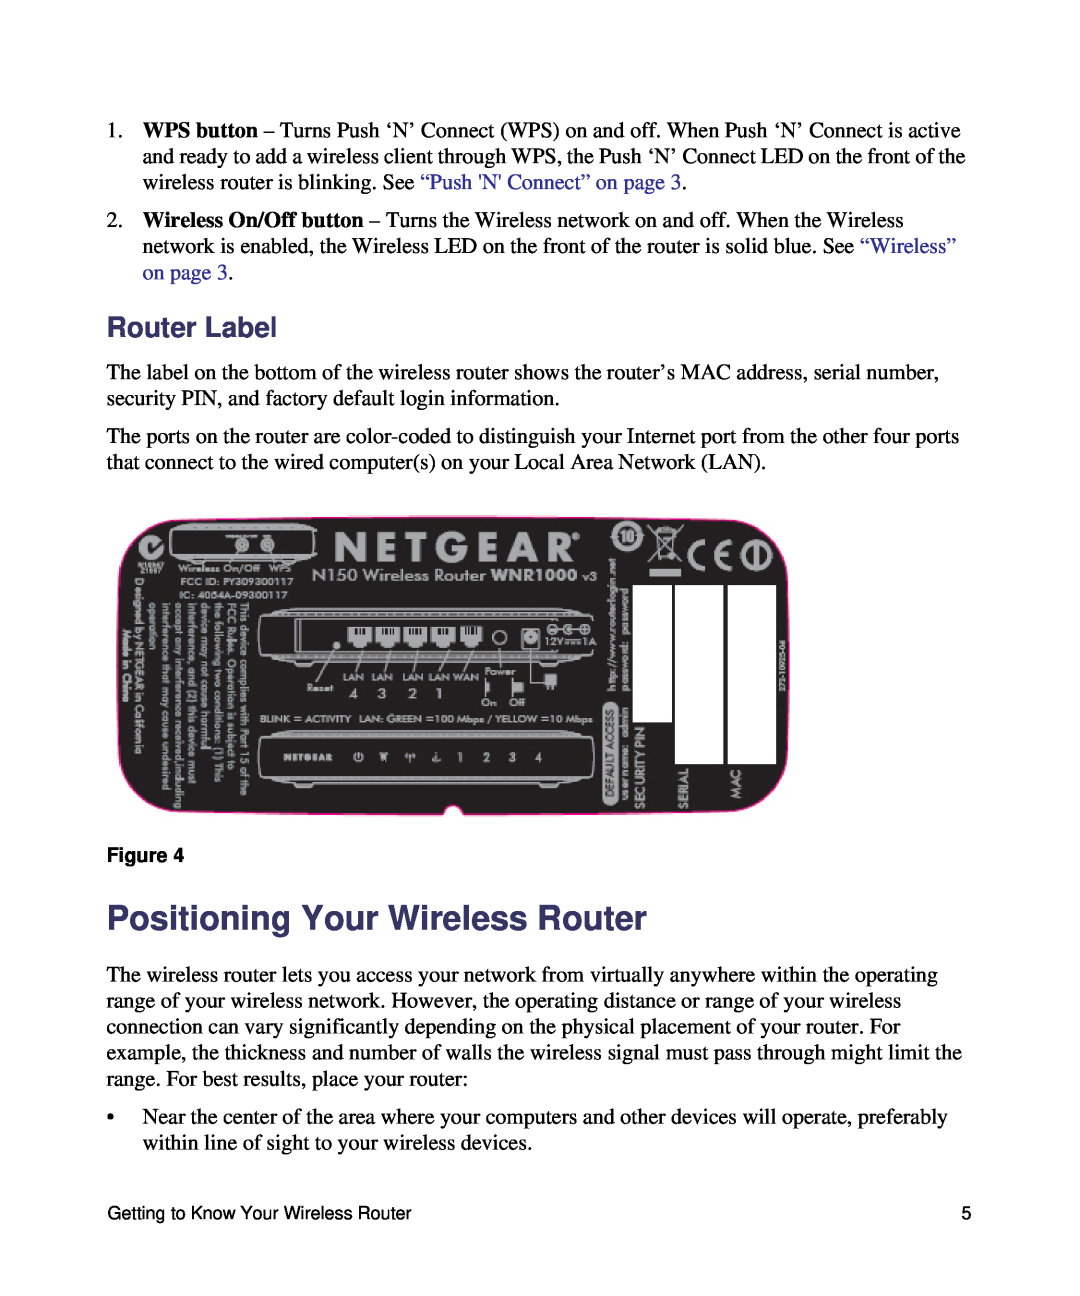 NETGEAR N150, WNR1000 manual Positioning Your Wireless Router, Router Label 